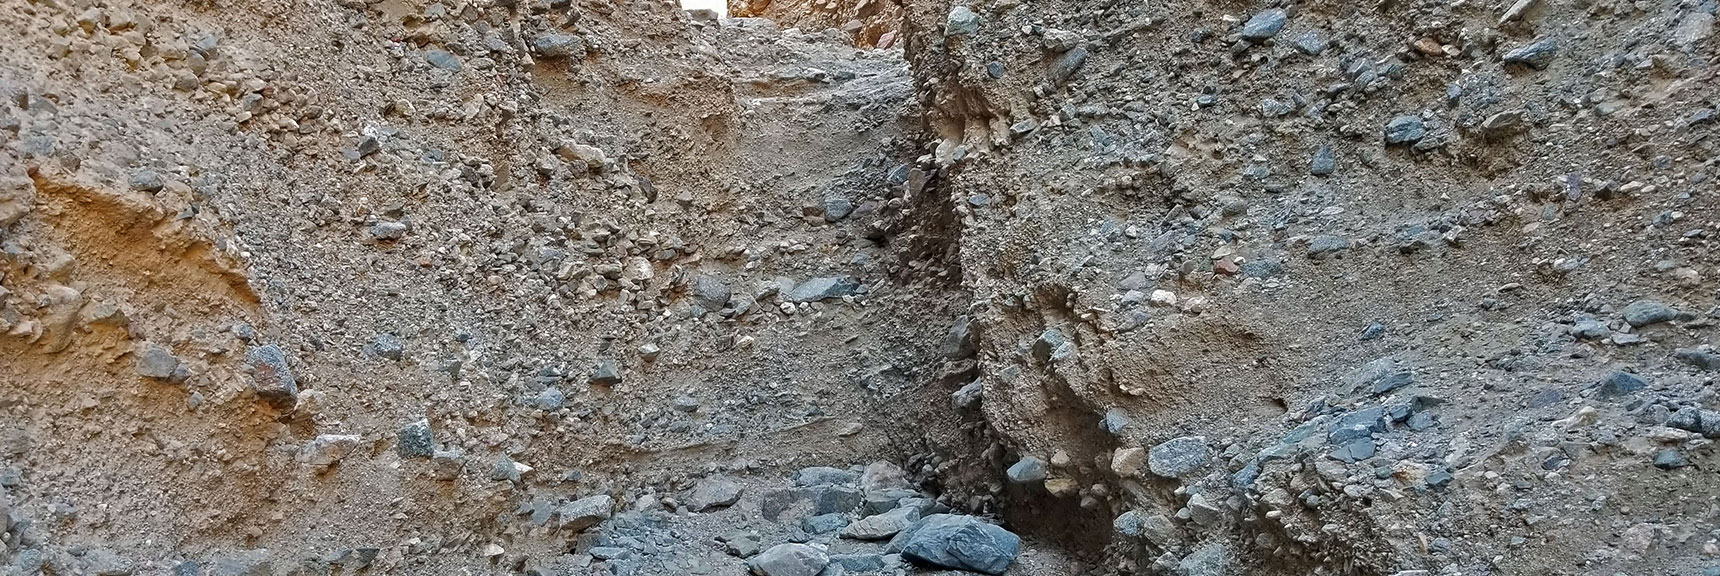 Turned Around at This High Ledge in the Second Unofficial Slot | Sidewinder Canyon | Death Valley National Park, California